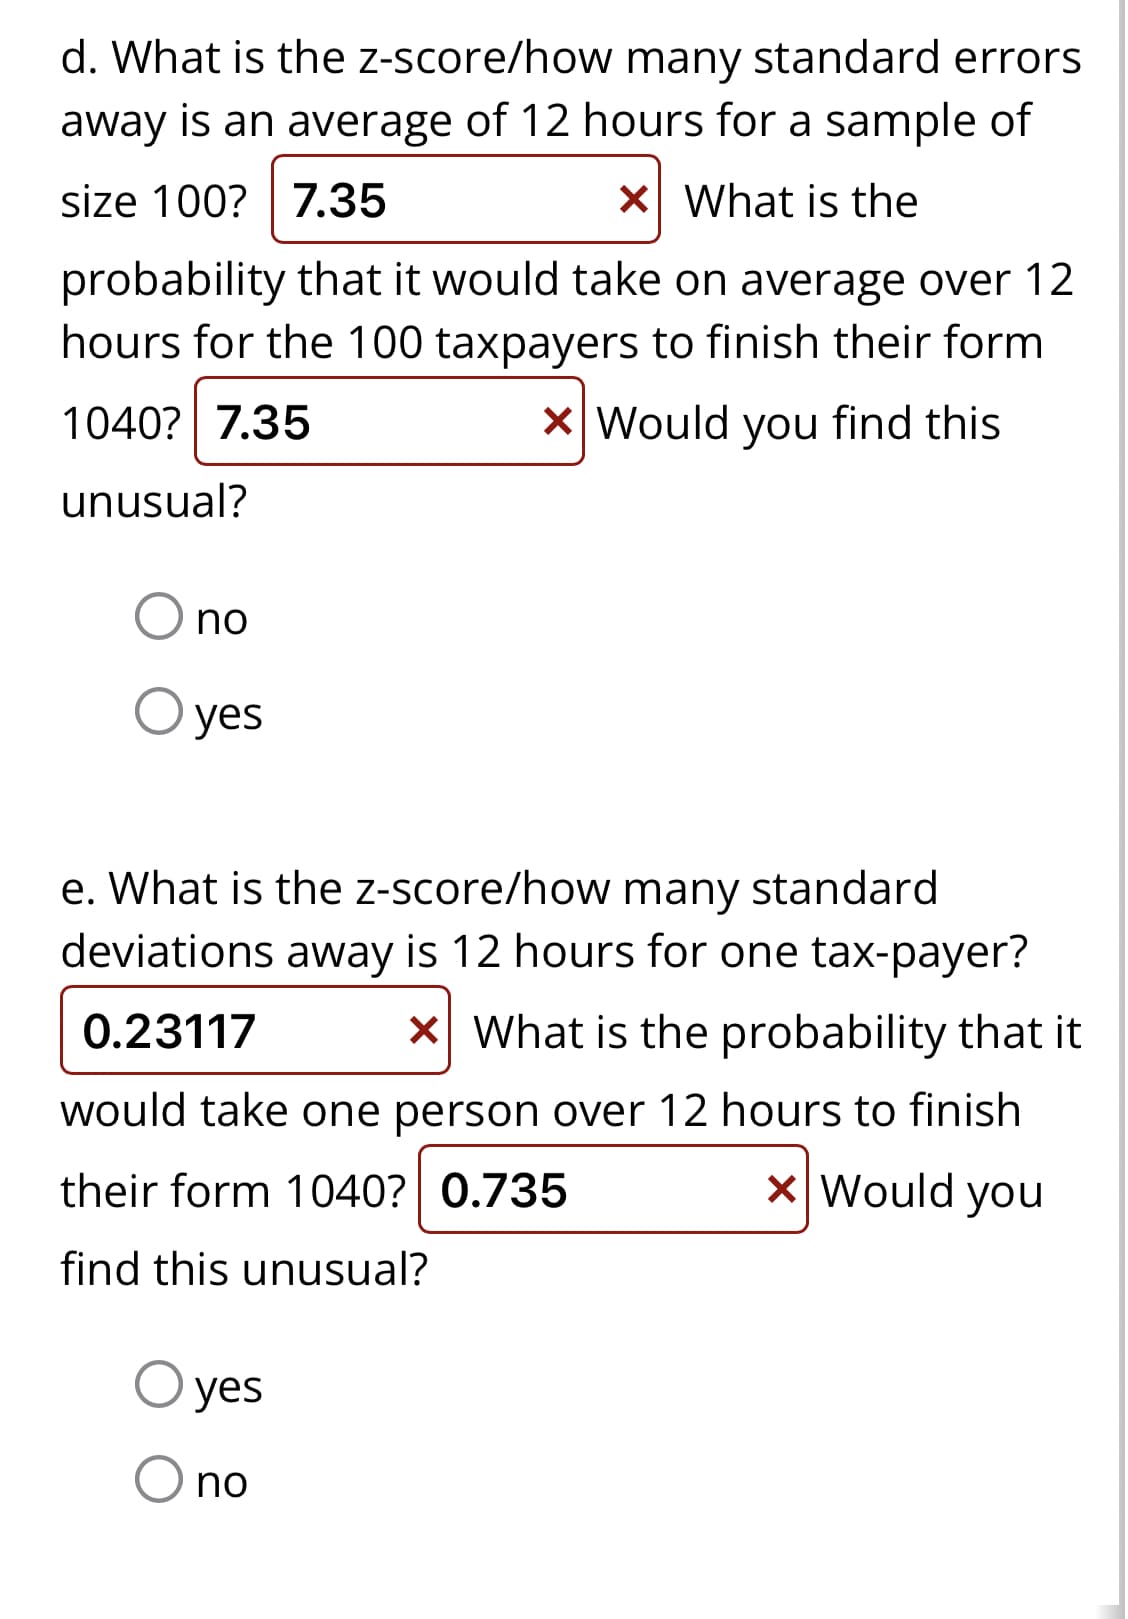 d. What is the z-score/how many standard errors
away is an average of 12 hours for a sample of
size 100? 7.35
x What is the
probability that it would take on average over 12
hours for the 100 taxpayers to finish their form
1040? 7.35
X Would you find this
unusual?
no
O yes
e. What is the z-score/how many standard
deviations away is 12 hours for one tax-payer?
0.23117 x What is the probability that it
would take one person over 12 hours to finish
their form 1040? 0.735
x Would you
find this unusual?
yes
no